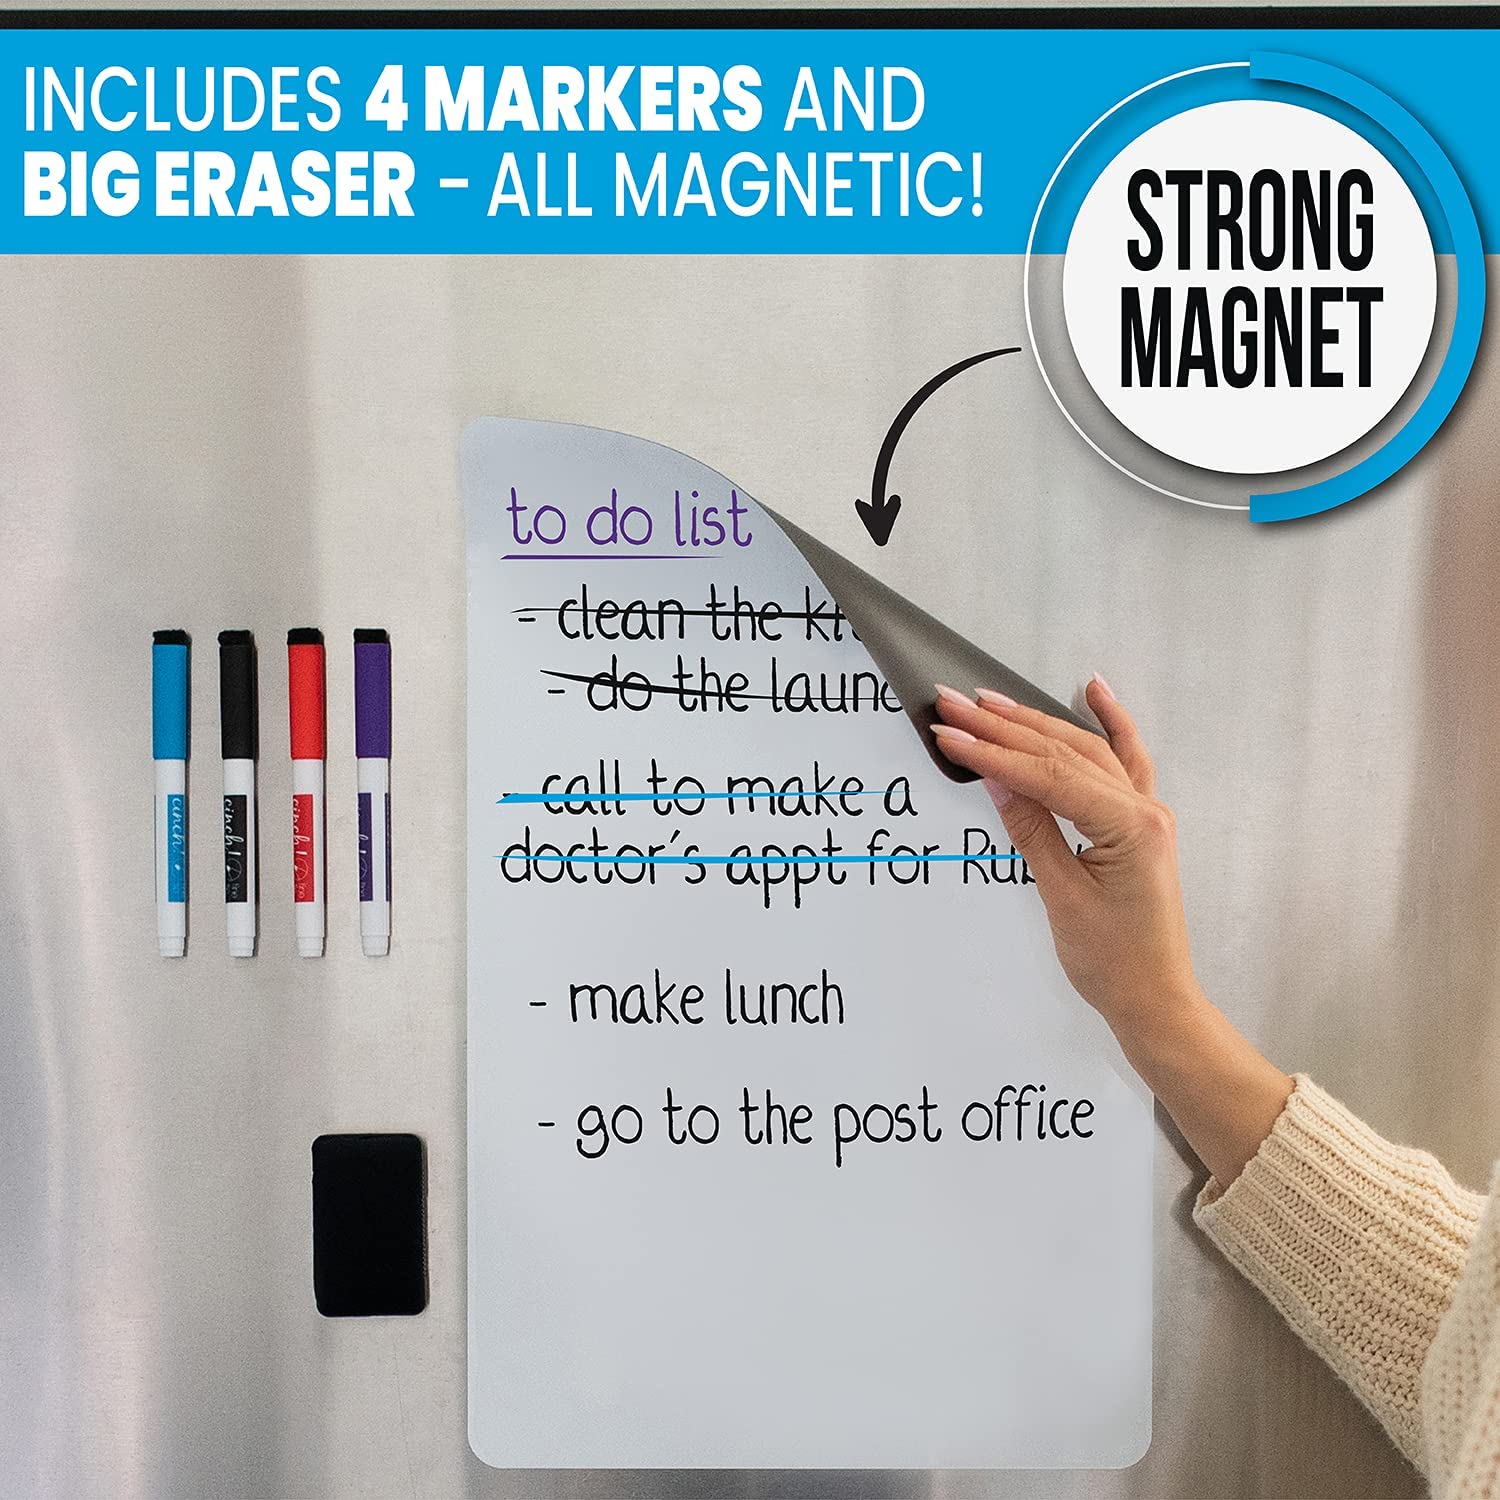 Magnetic Dry Erase Whiteboard Sheet for Kitchen Fridge: with Stain Resistant Technology  - Like New